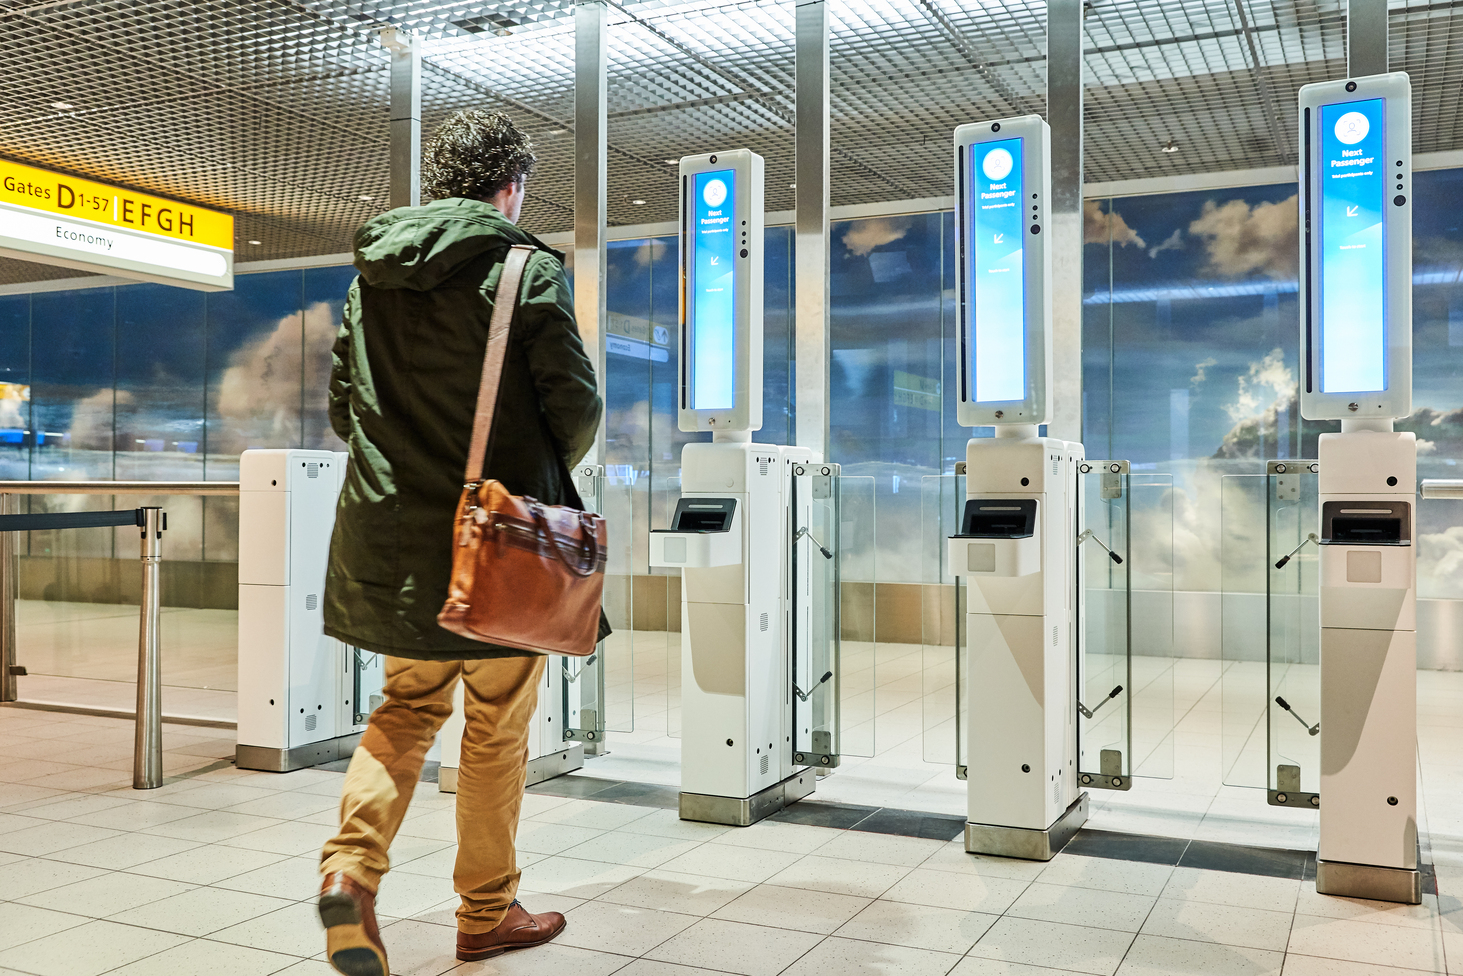 No need for travel documents at Schiphol thanks to Seamless Flow